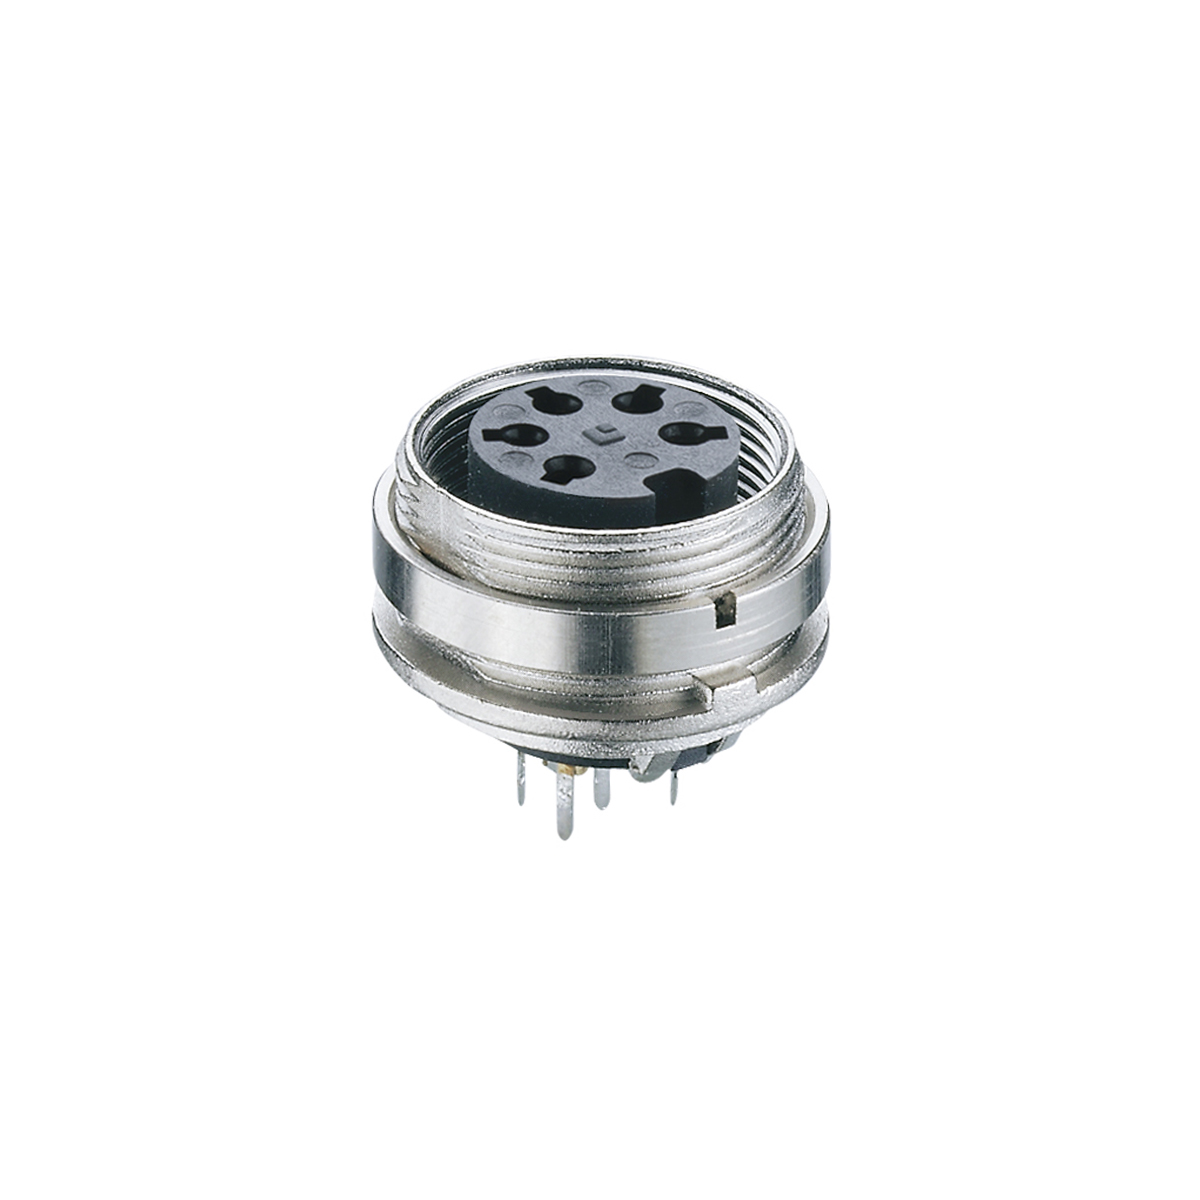 Lumberg: KGR (Series 03 | Circular connectors with threaded joint M16 acc. to IEC 61076-2-106, IP40/IP68)